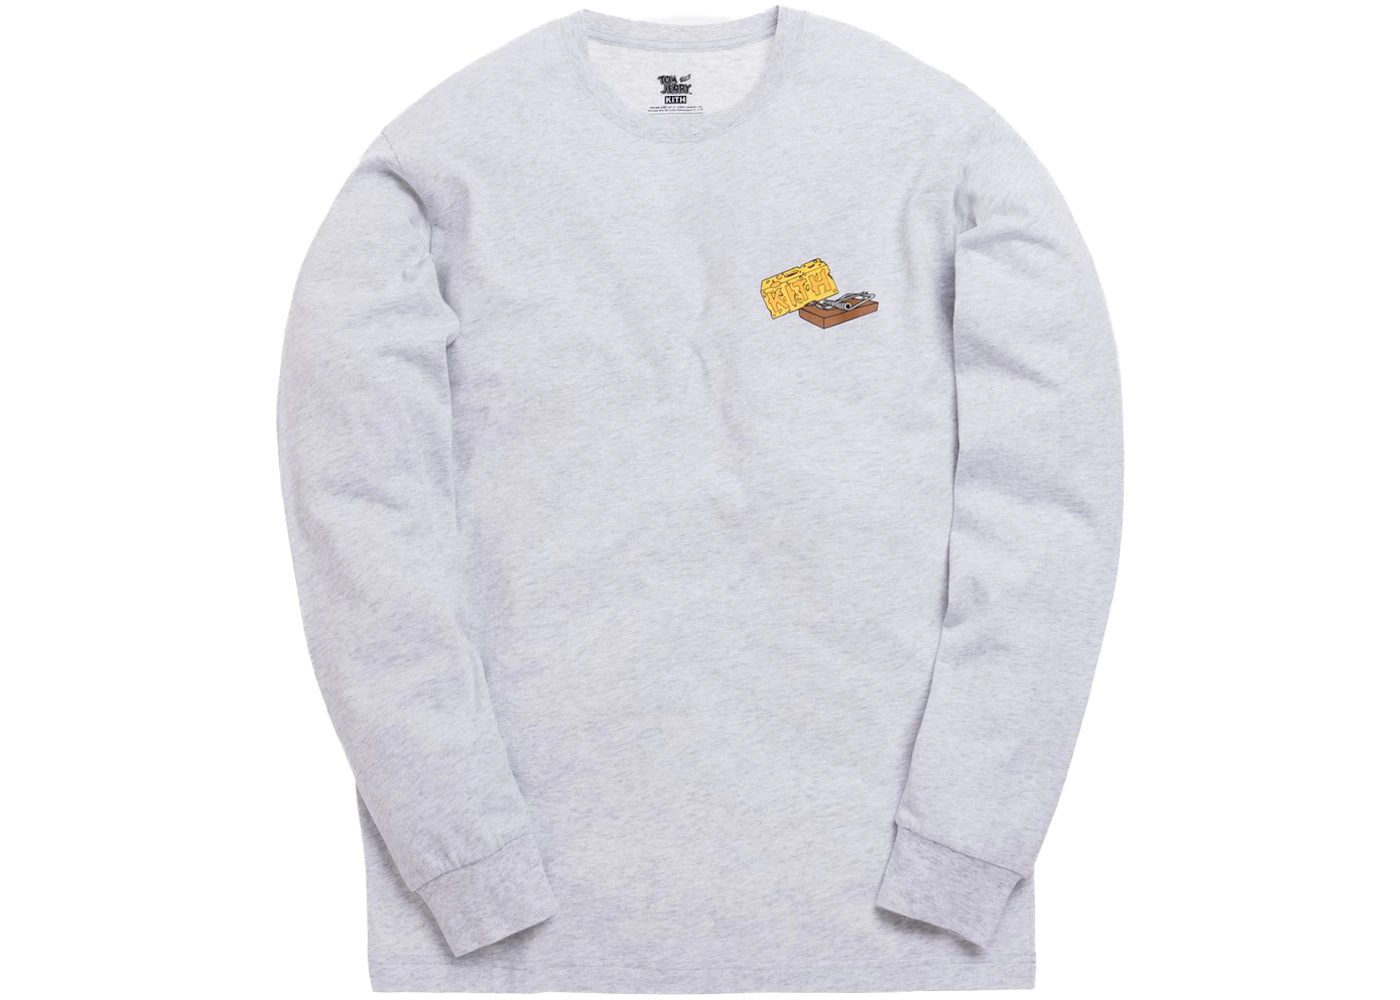 Kith x Tom & Jerry L/S Cheese Tee Light Heather Grey Men's - SS19 - US